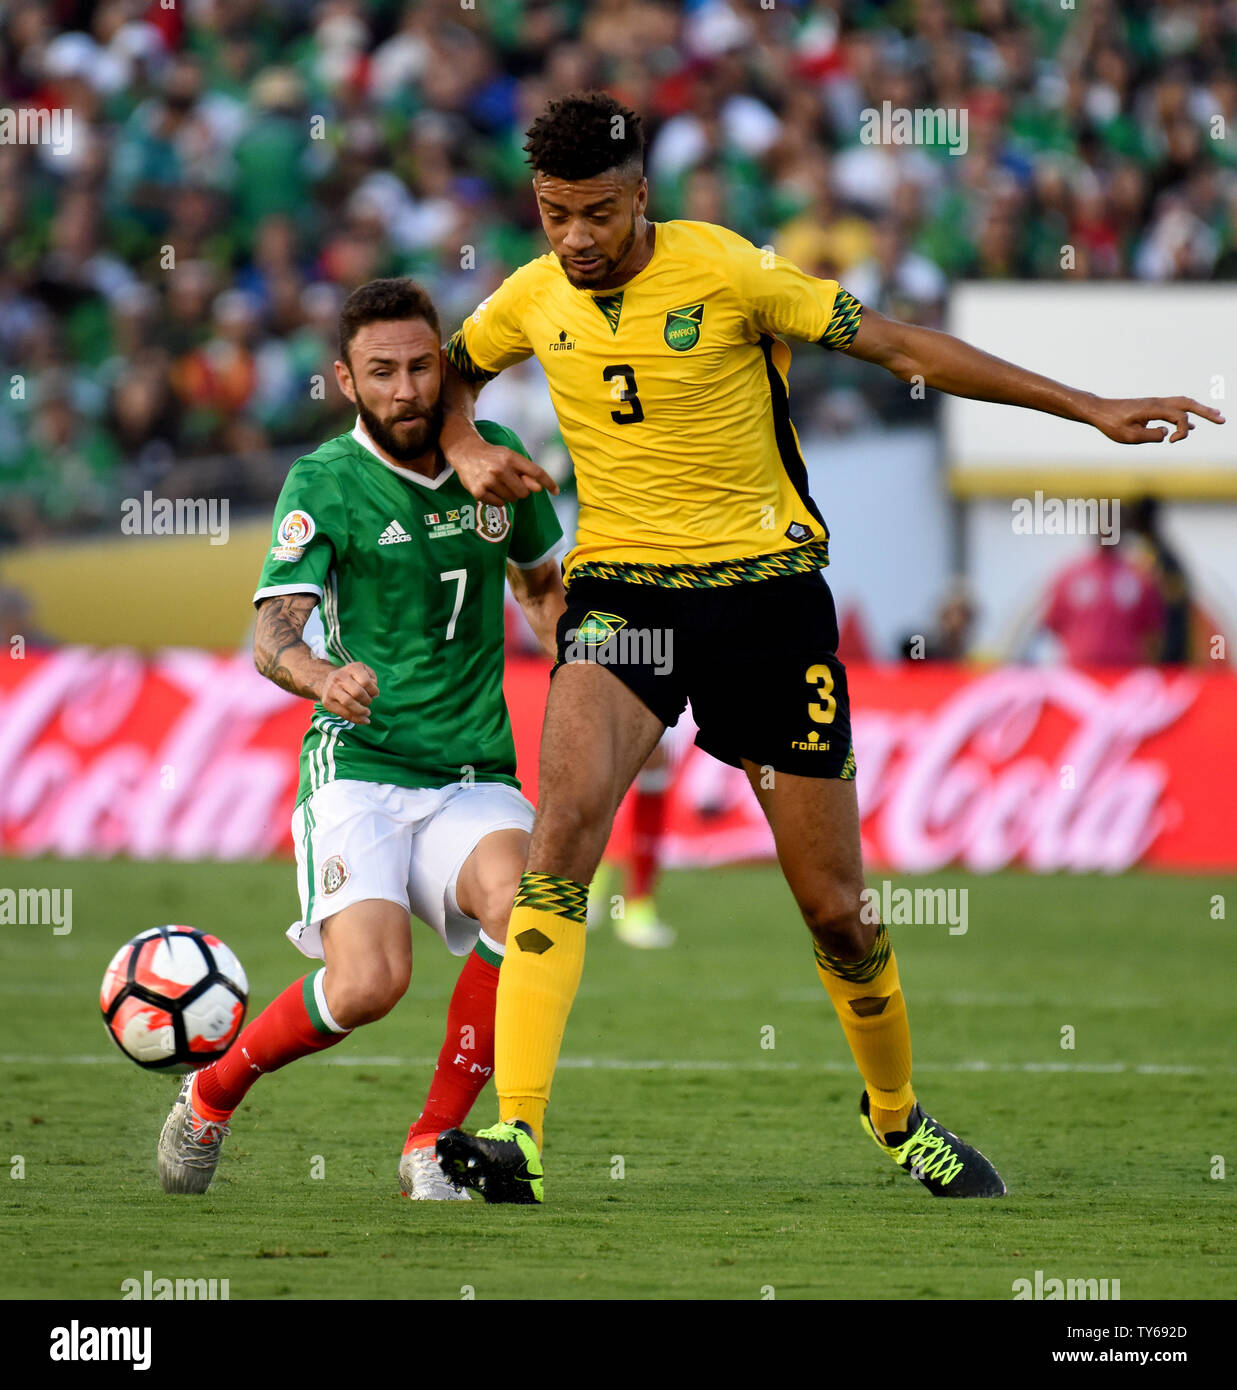 Mexico's defender Miguel Layún (7) gets and elbow to the head from Jamaica defender Michael Hector (3) during the first half of a 2016 Copa America Centenario Group A match at the Rose Bowl in Pasadena, California, on June 9, 2016.      Photo by Michael Owen Baker/UPI Stock Photo